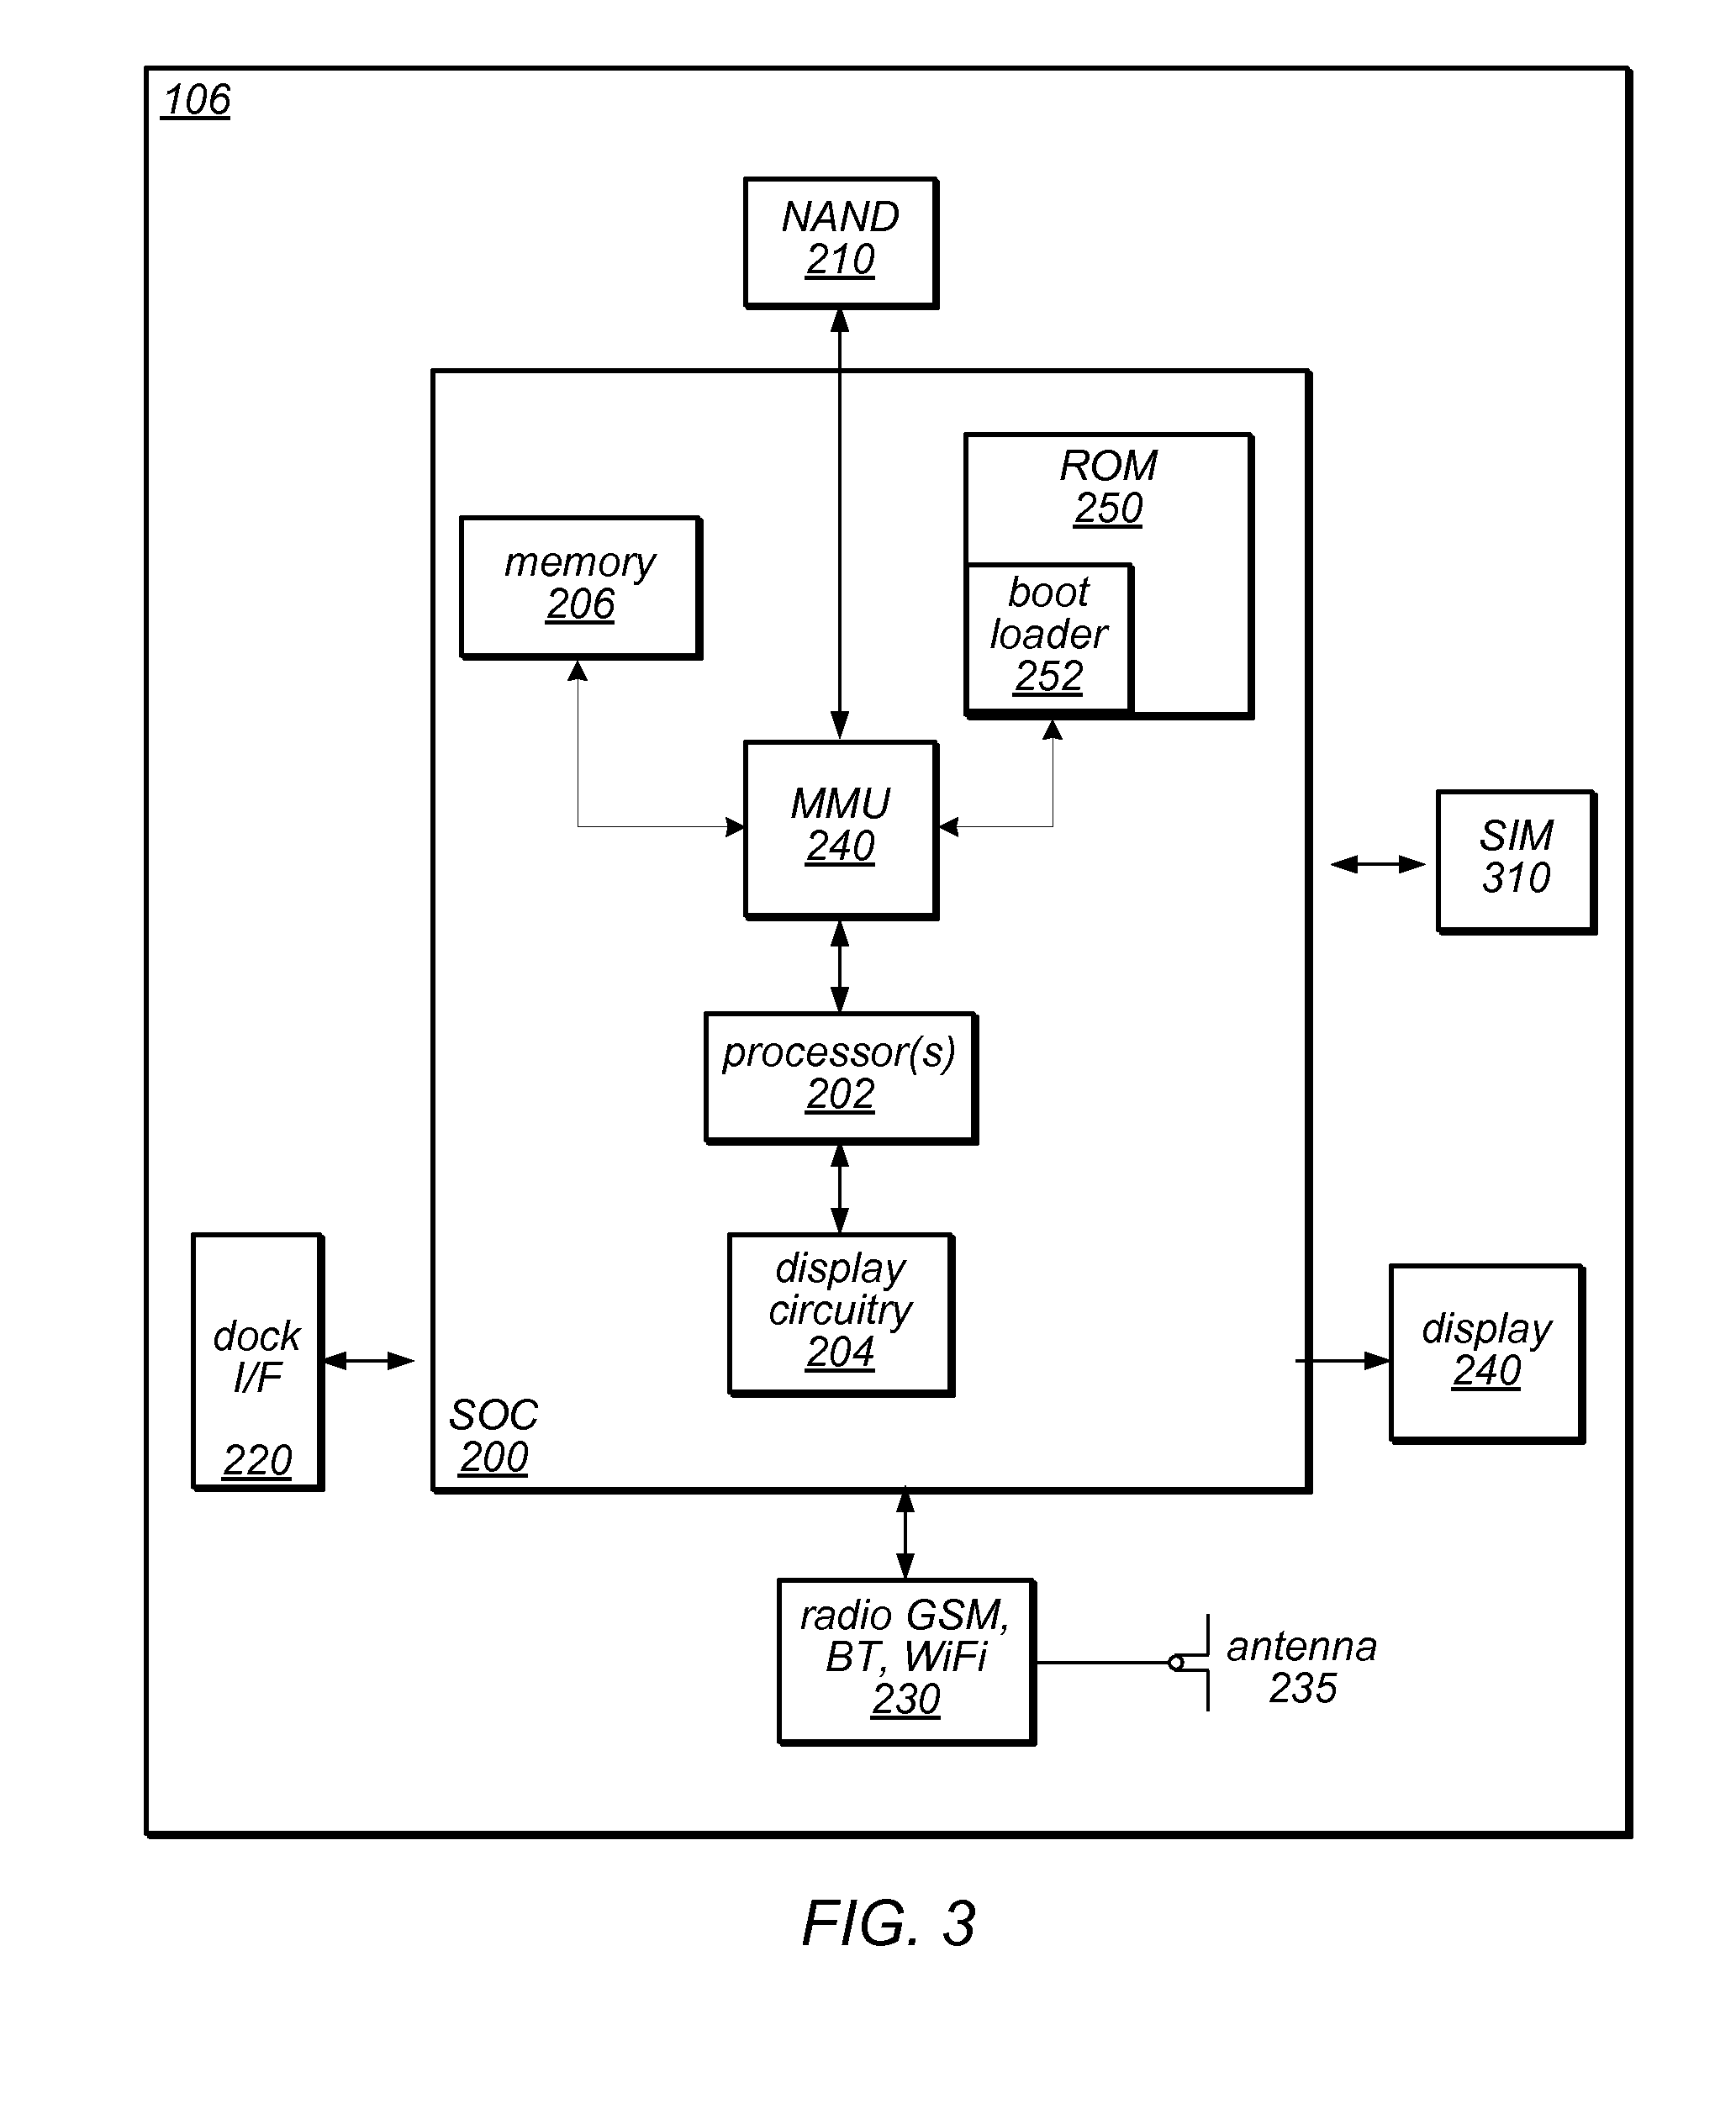 Selecting a Subscriber Identity in a User Equipment Device Having Multiple Subscriber Identities